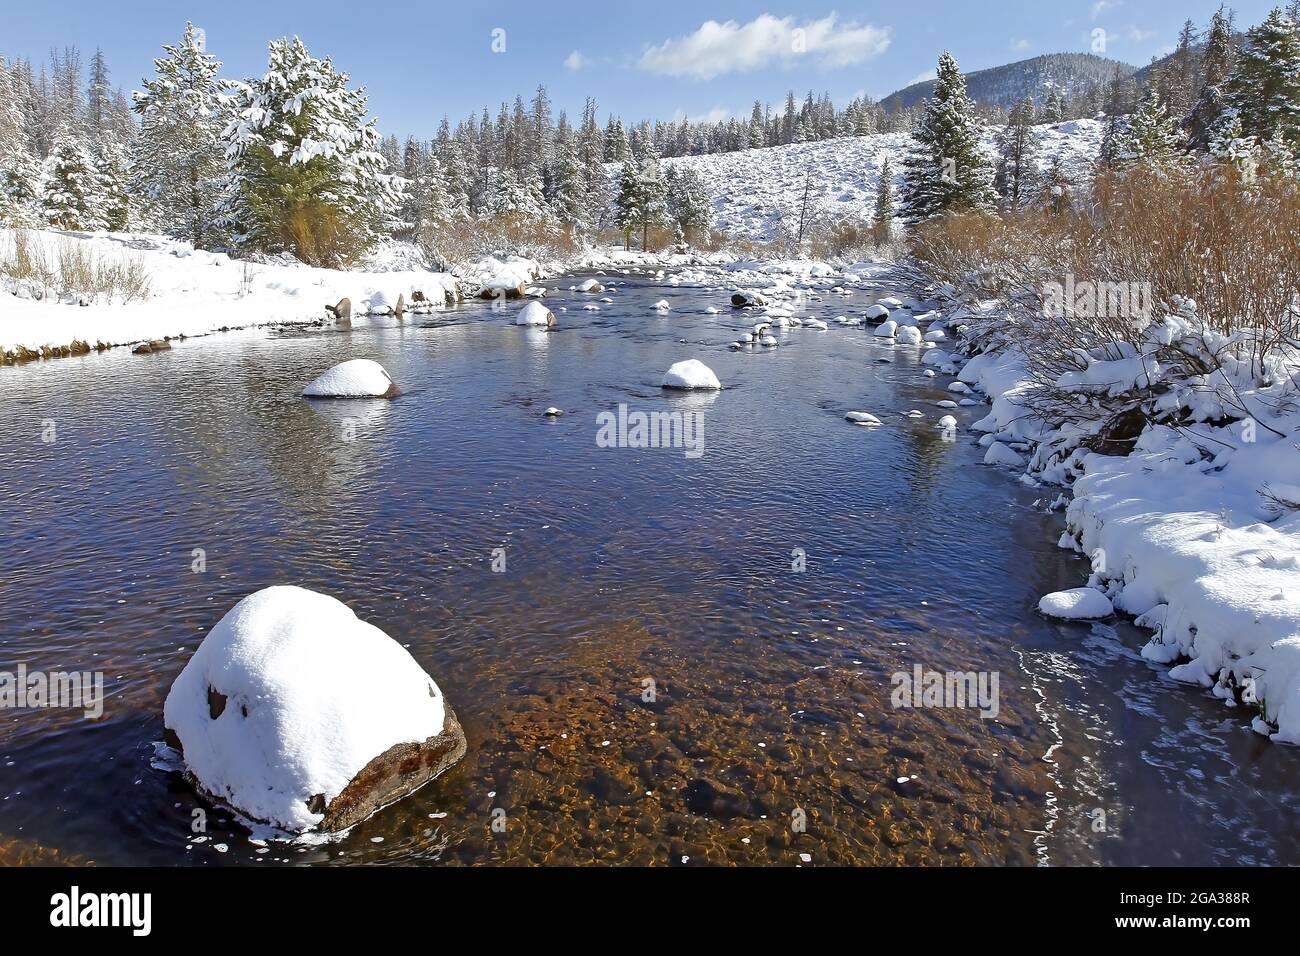 Laramie River with snow-covered rocks on a winter landscape, running through Wyoming and Colorado, USA; Wyoming, United States of America Stock Photo